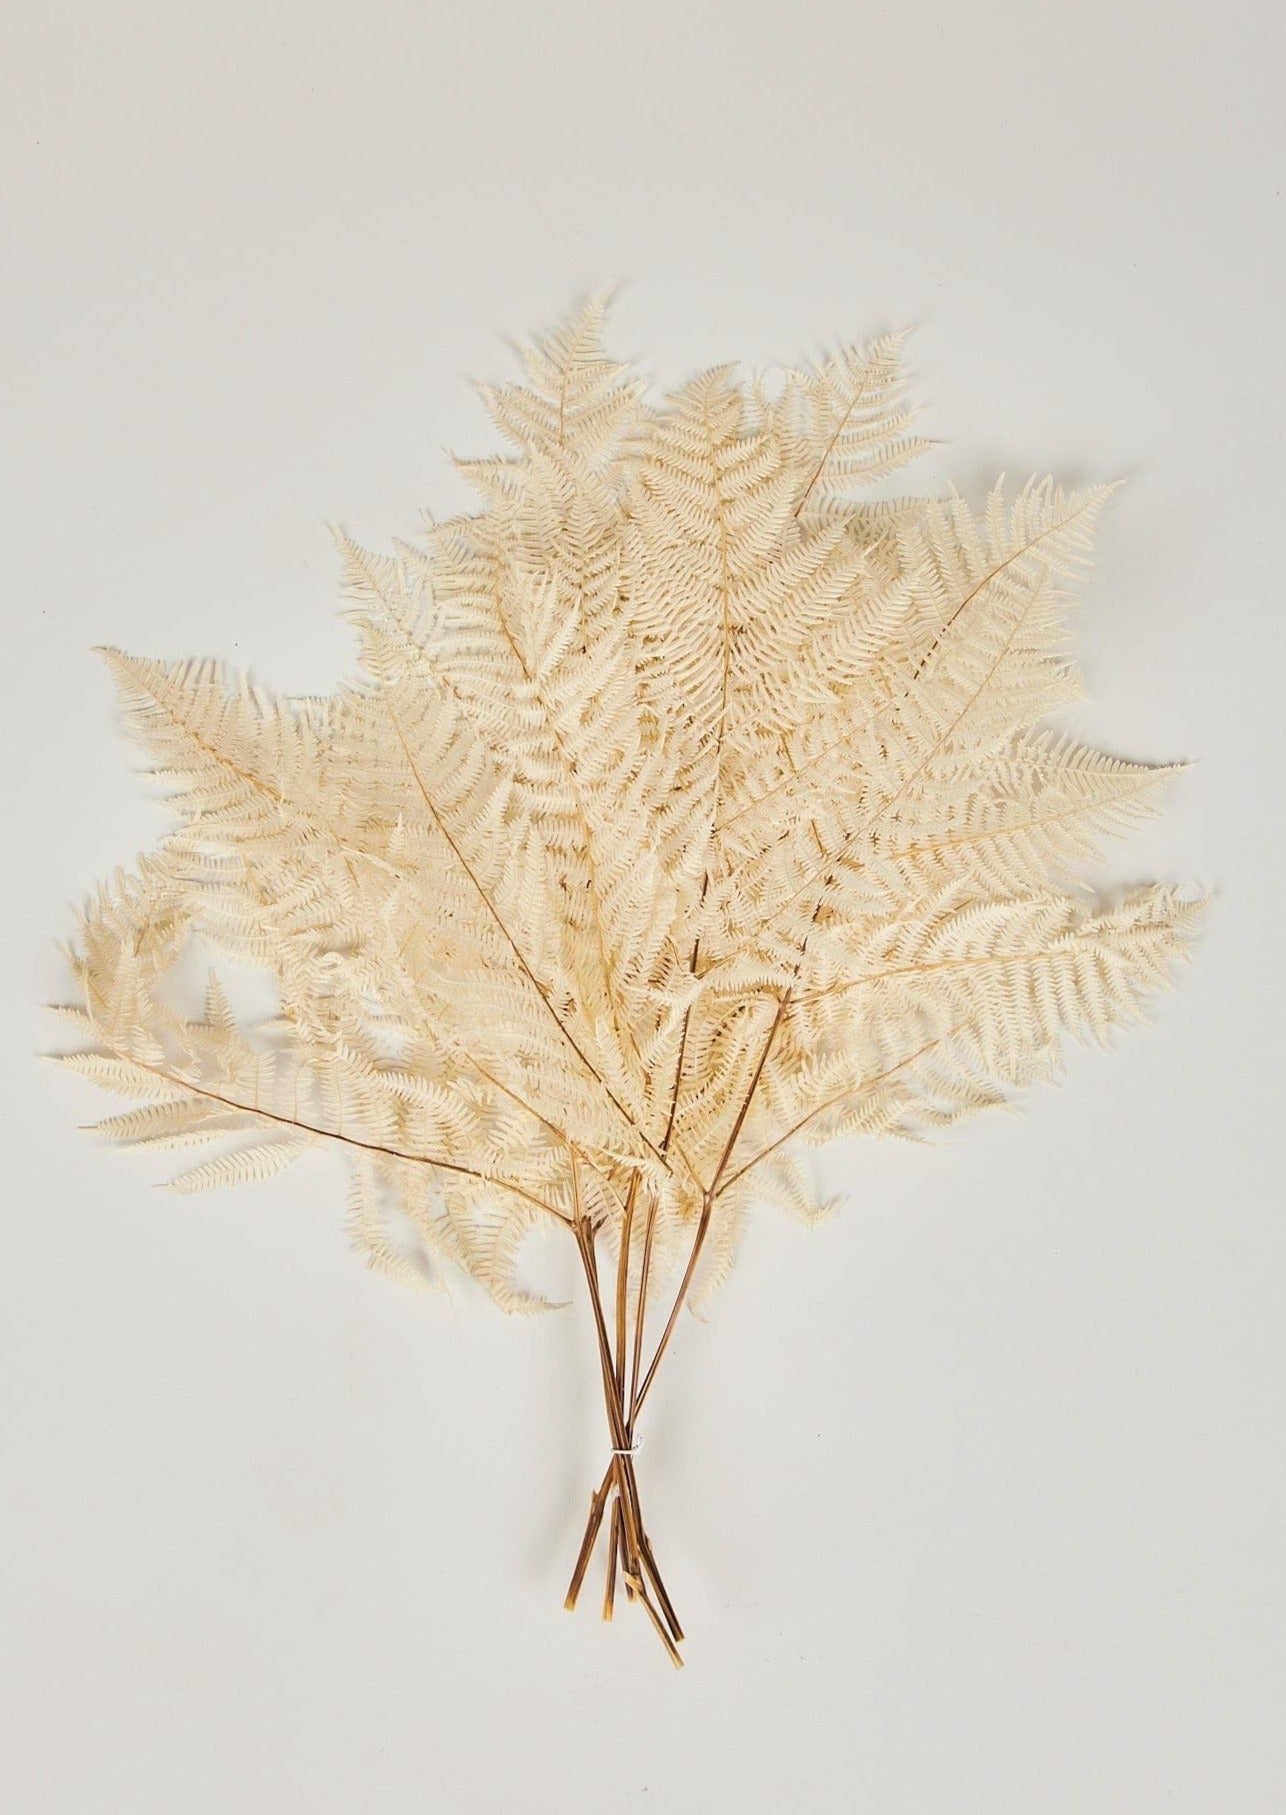 Dried Accents Bleached White Fern Leaf Bundle at afloral